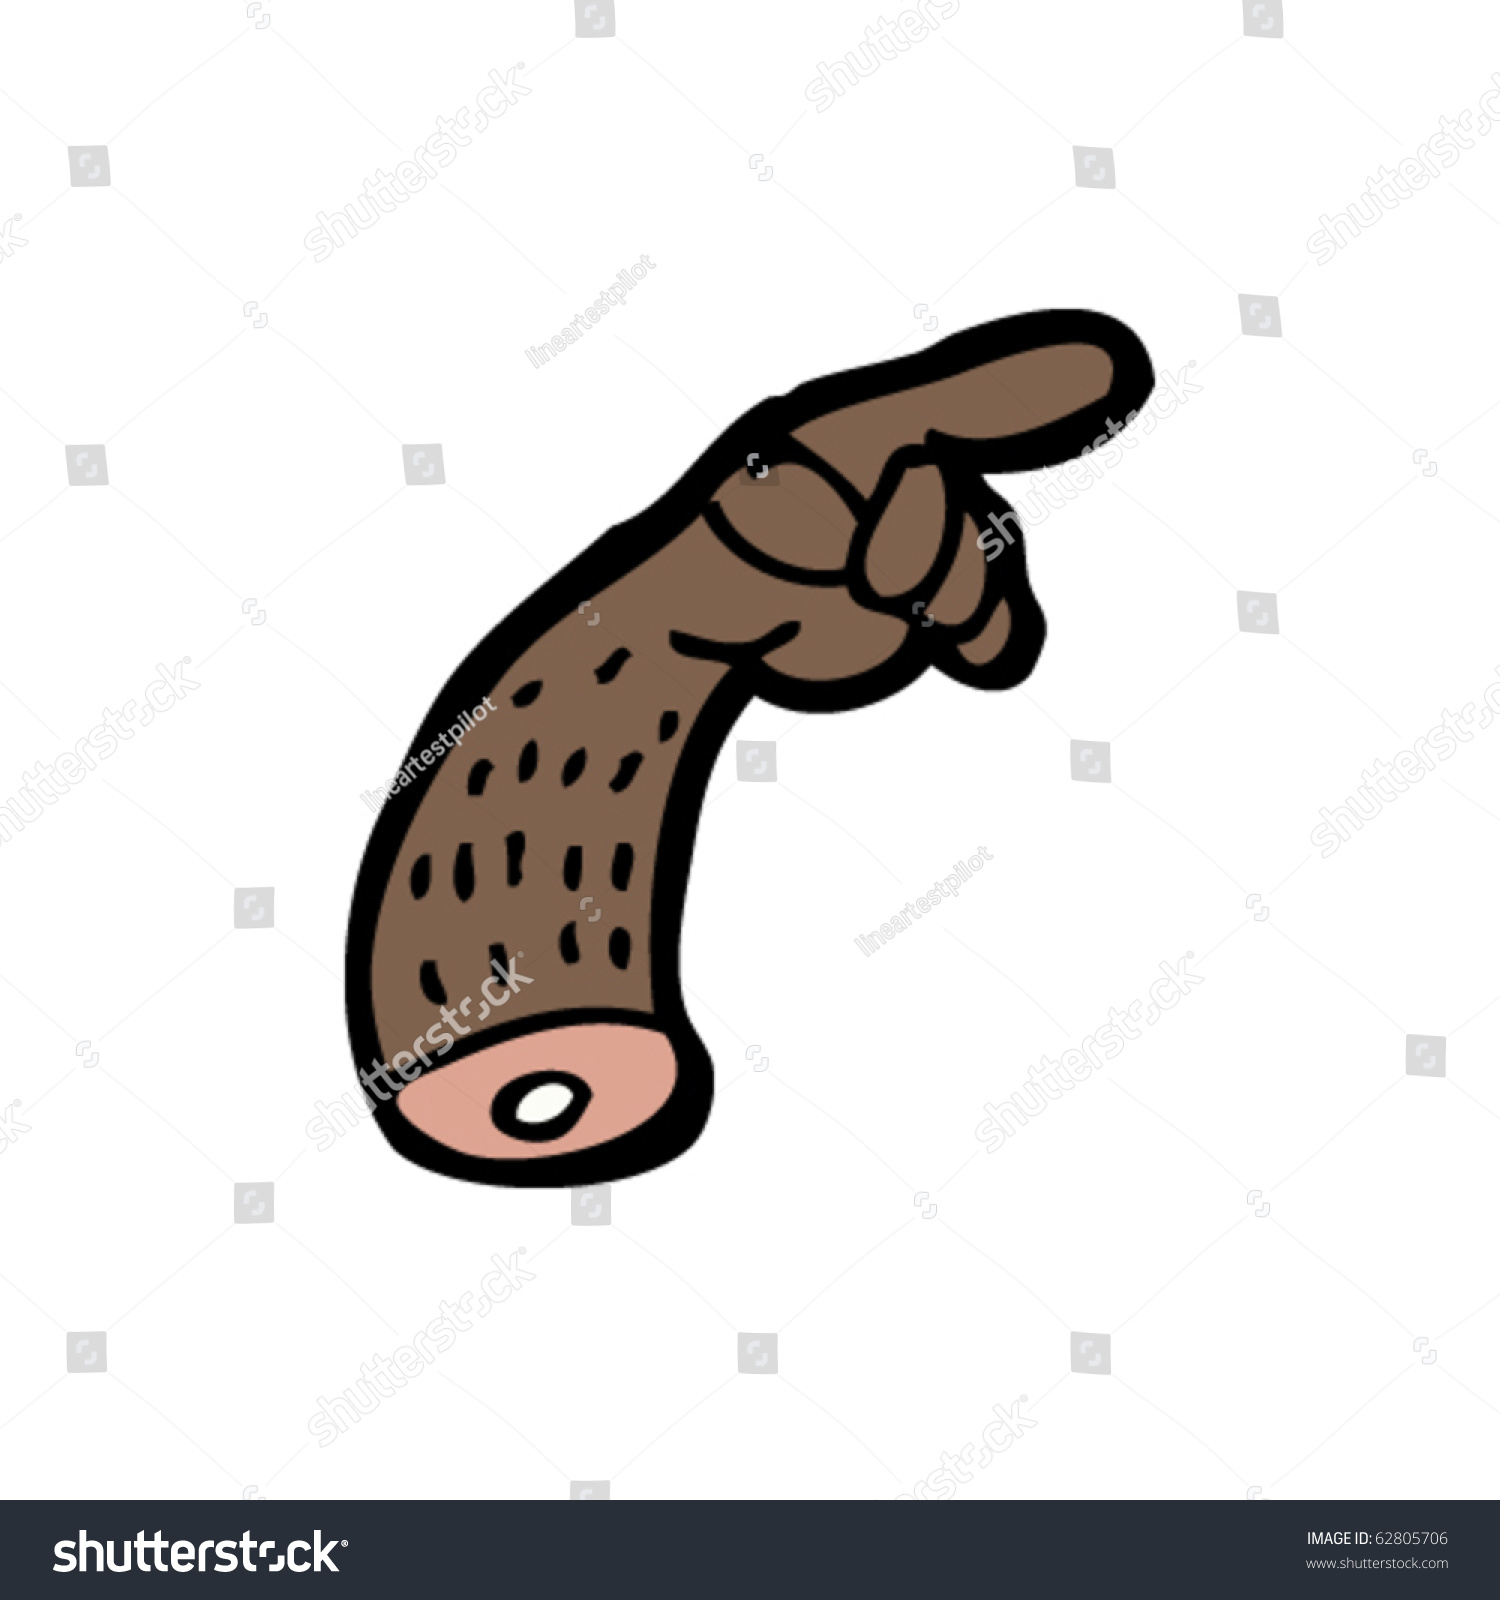 Pointing Arm Cartoon Stock Vector (Royalty Free) 62805706 | Shutterstock